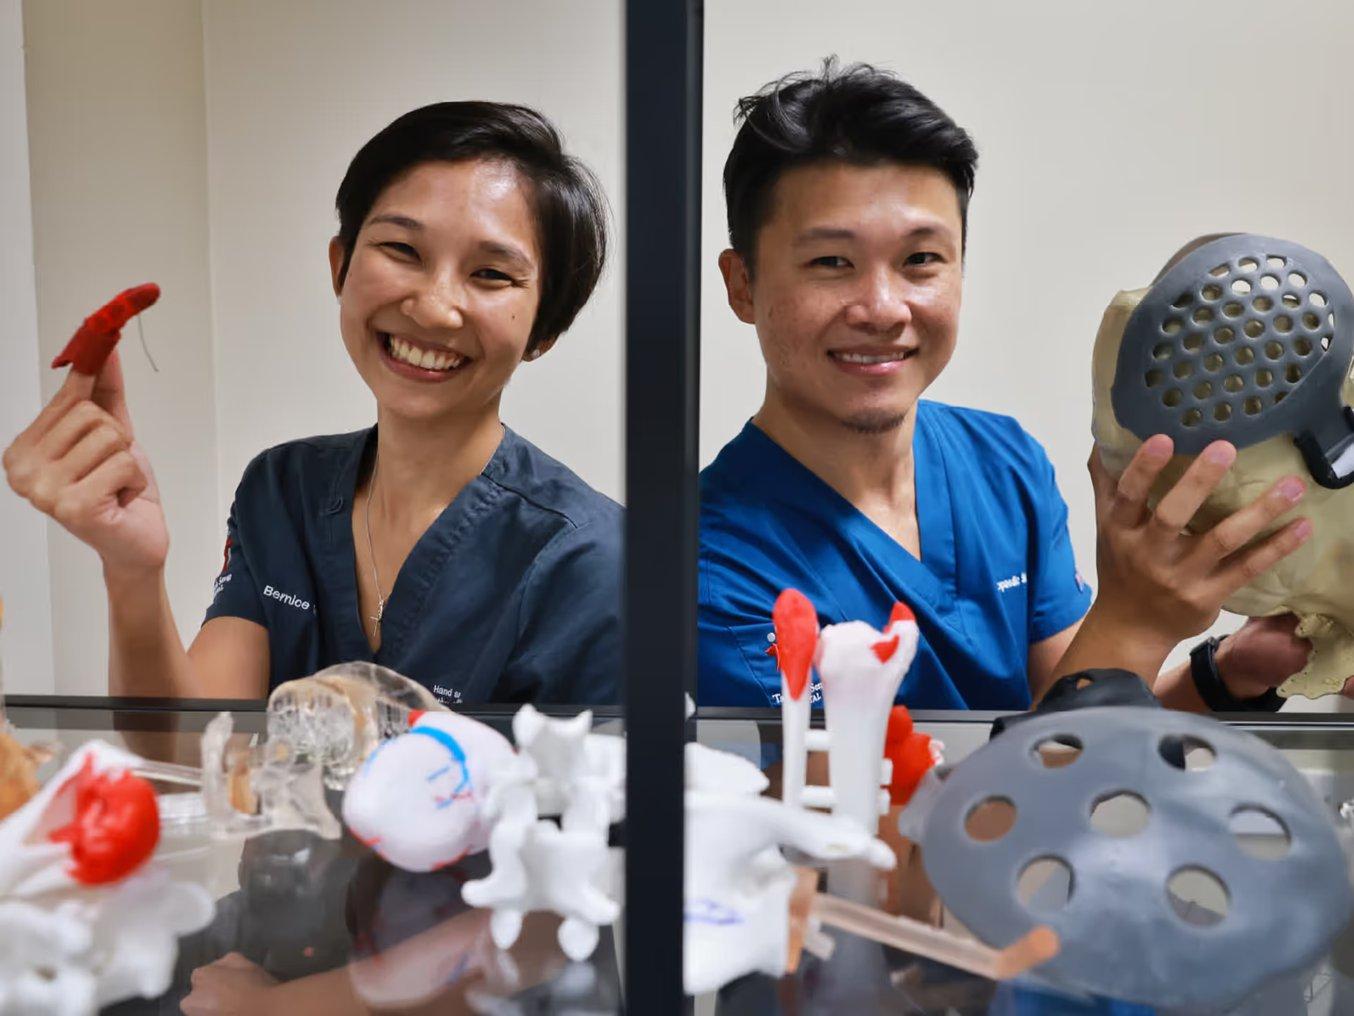 Two doctors holding 3D printed medial devices